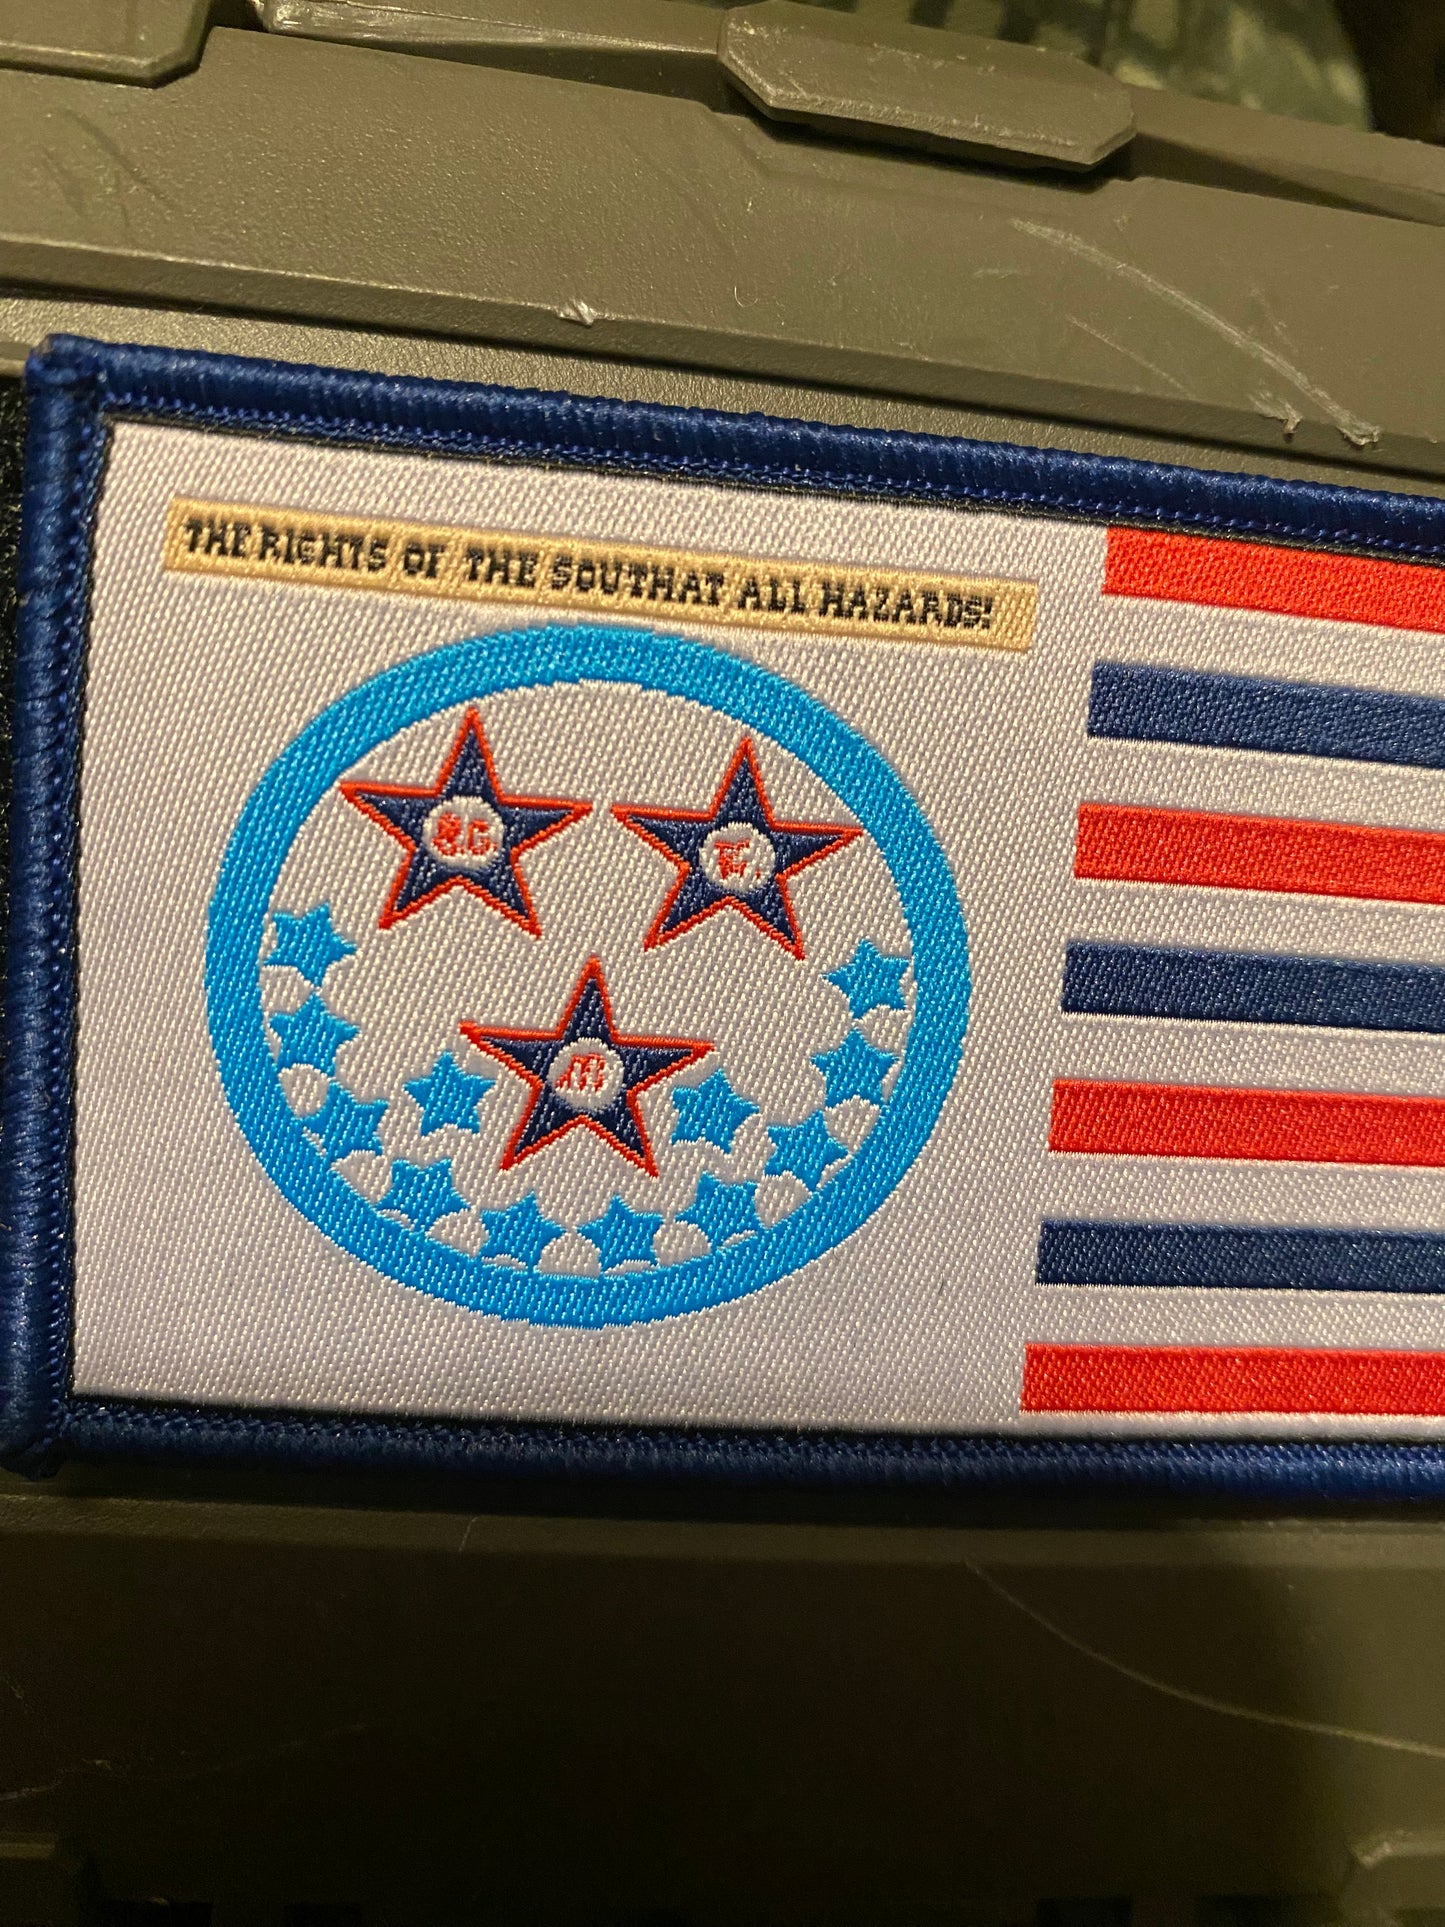 "The Rights of the South at All Hazards!" - Florida Secession Flag Patch